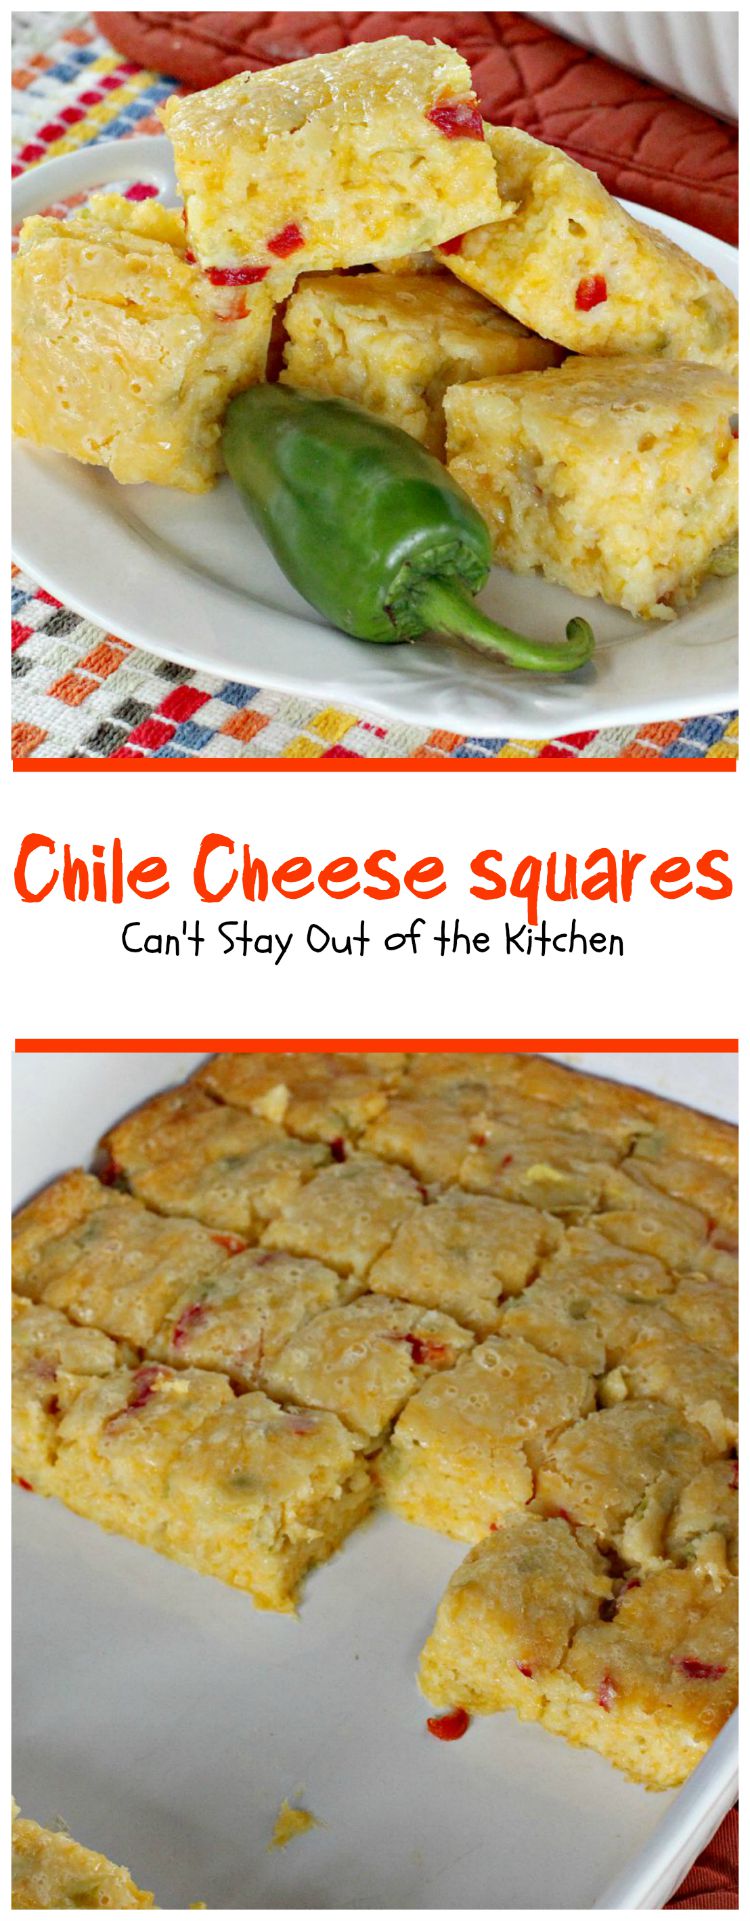 Chile Cheese Squares | Can't Stay Out of the Kitchen